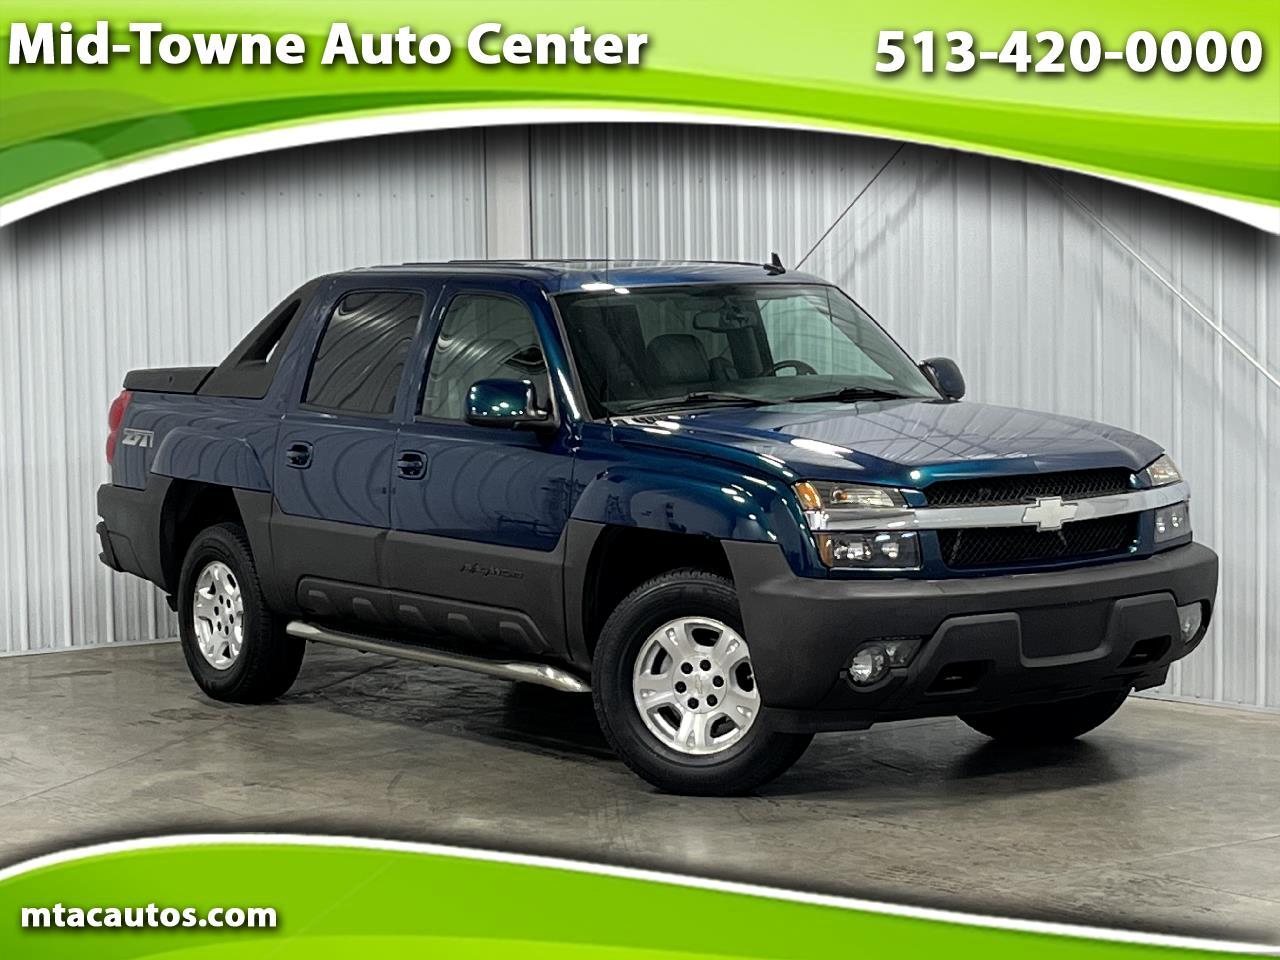 Chevrolet Avalanche 1500 5dr Crew Cab 130" WB 4WD Z71 2006